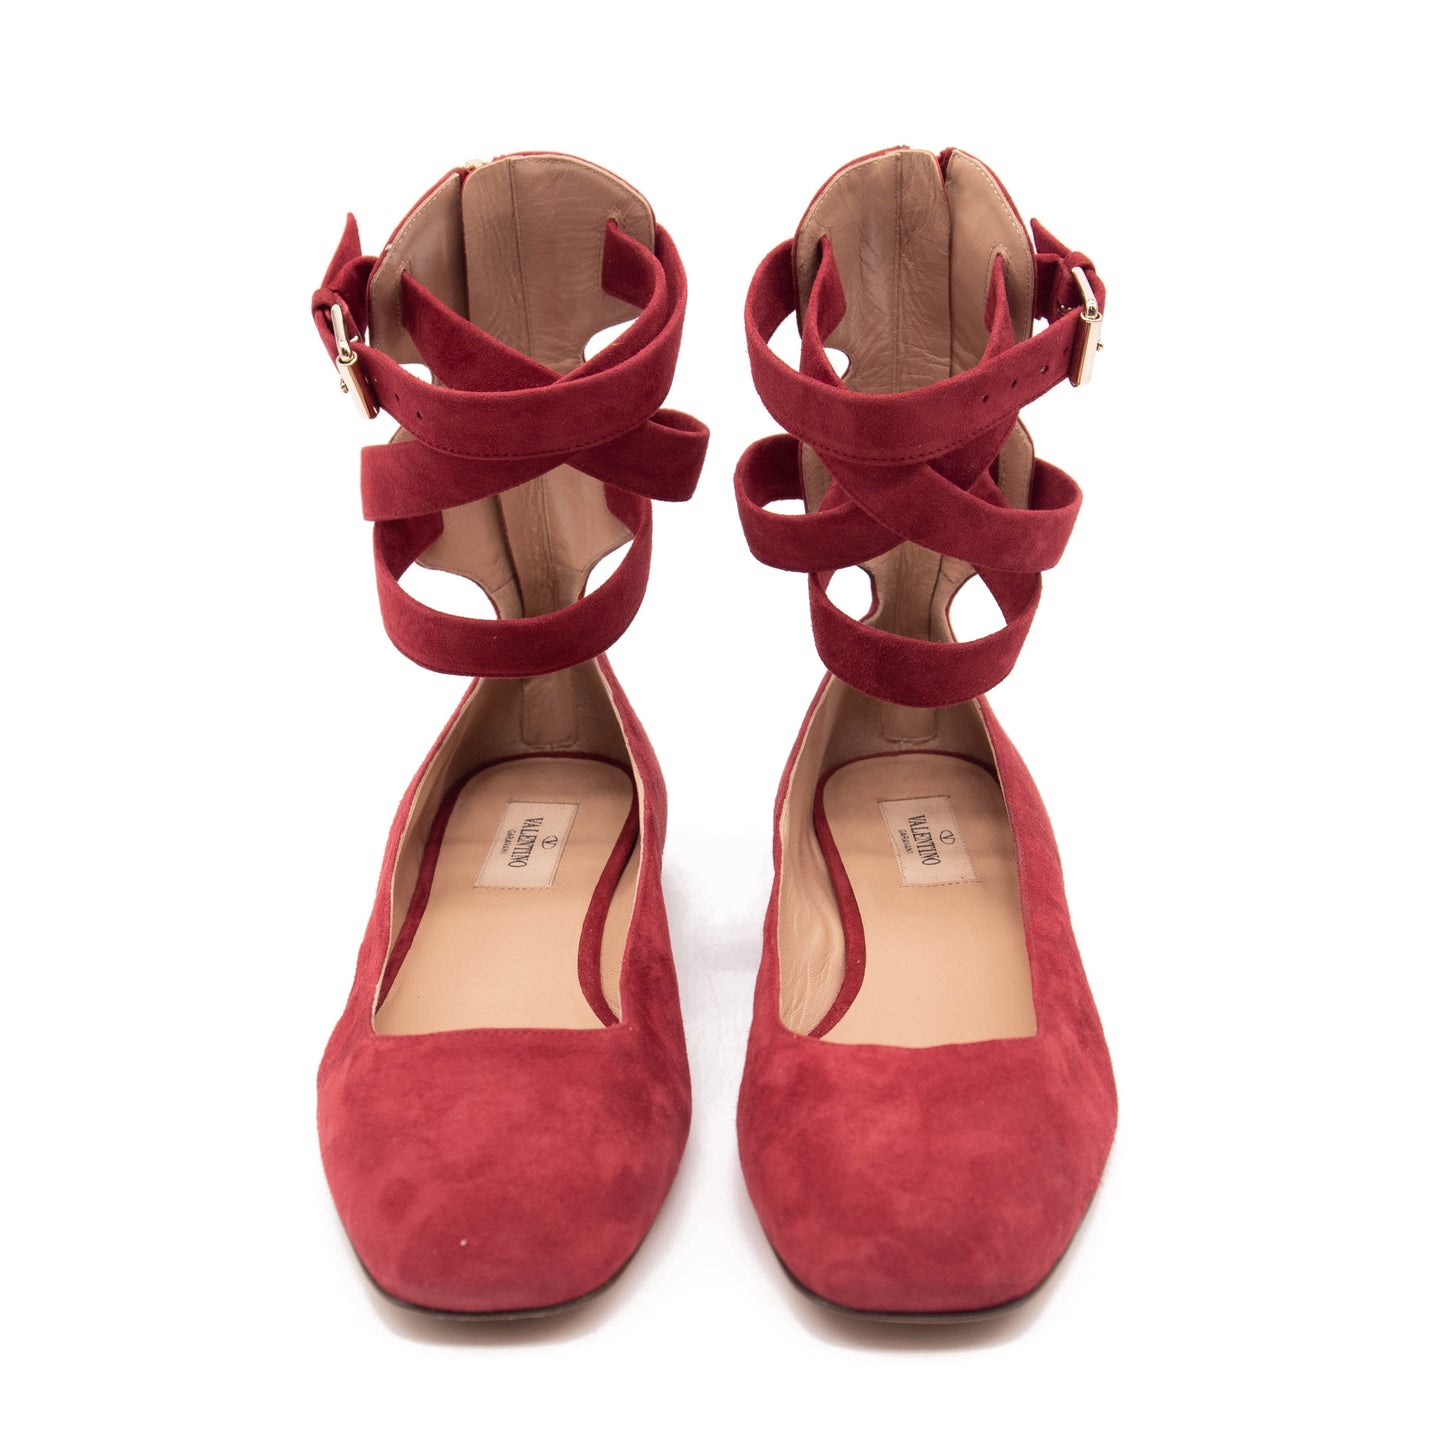 NEW Valentino Red Suede Ankle Wrap Ballet Rubino Flats EU 39